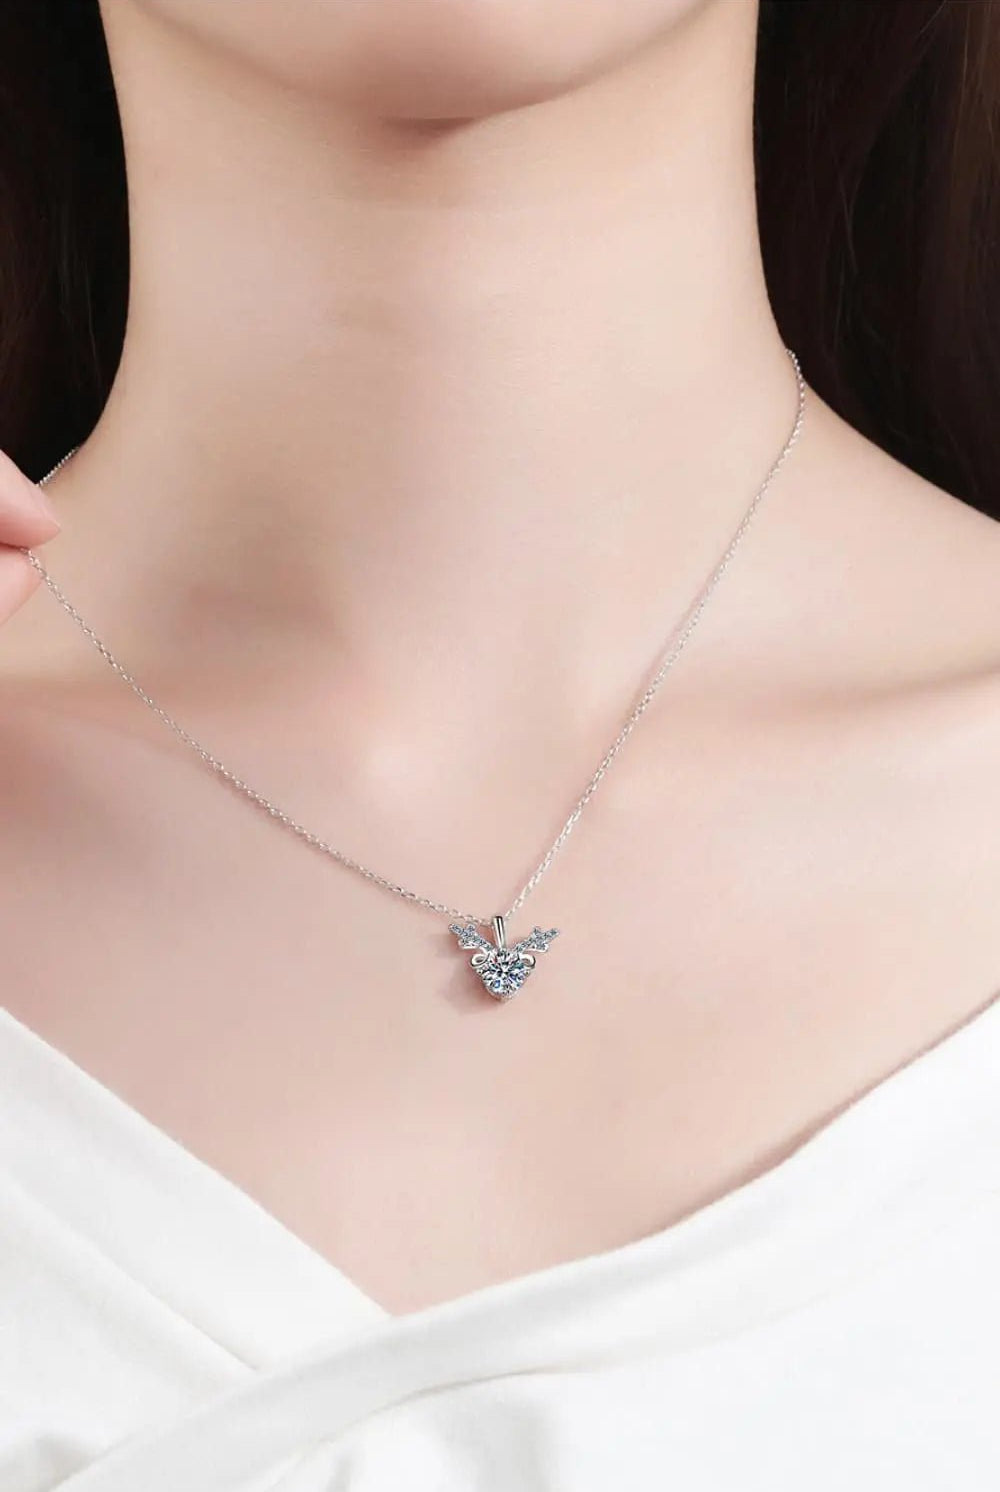 1 Carat Moissanite 925 Sterling Silver Necklace - GemThreads Boutique